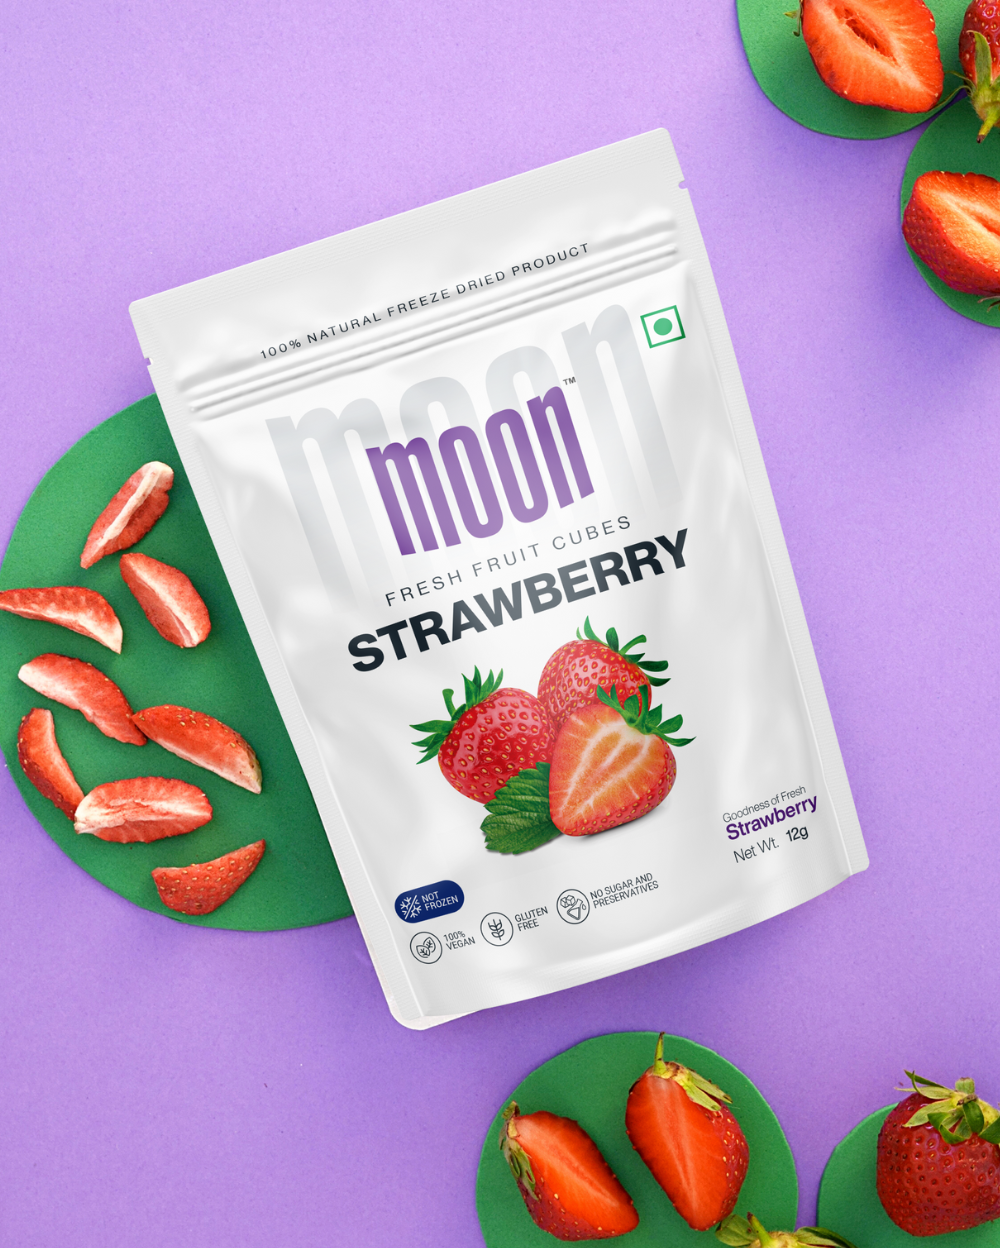 A package of Moon Freeze Dried Strawberry + Mango on a purple background, surrounded by fresh strawberry slices arranged on green circular mats, ideal for a healthy snack from MOONFREEZE FOODS PRIVATE LIMITED.